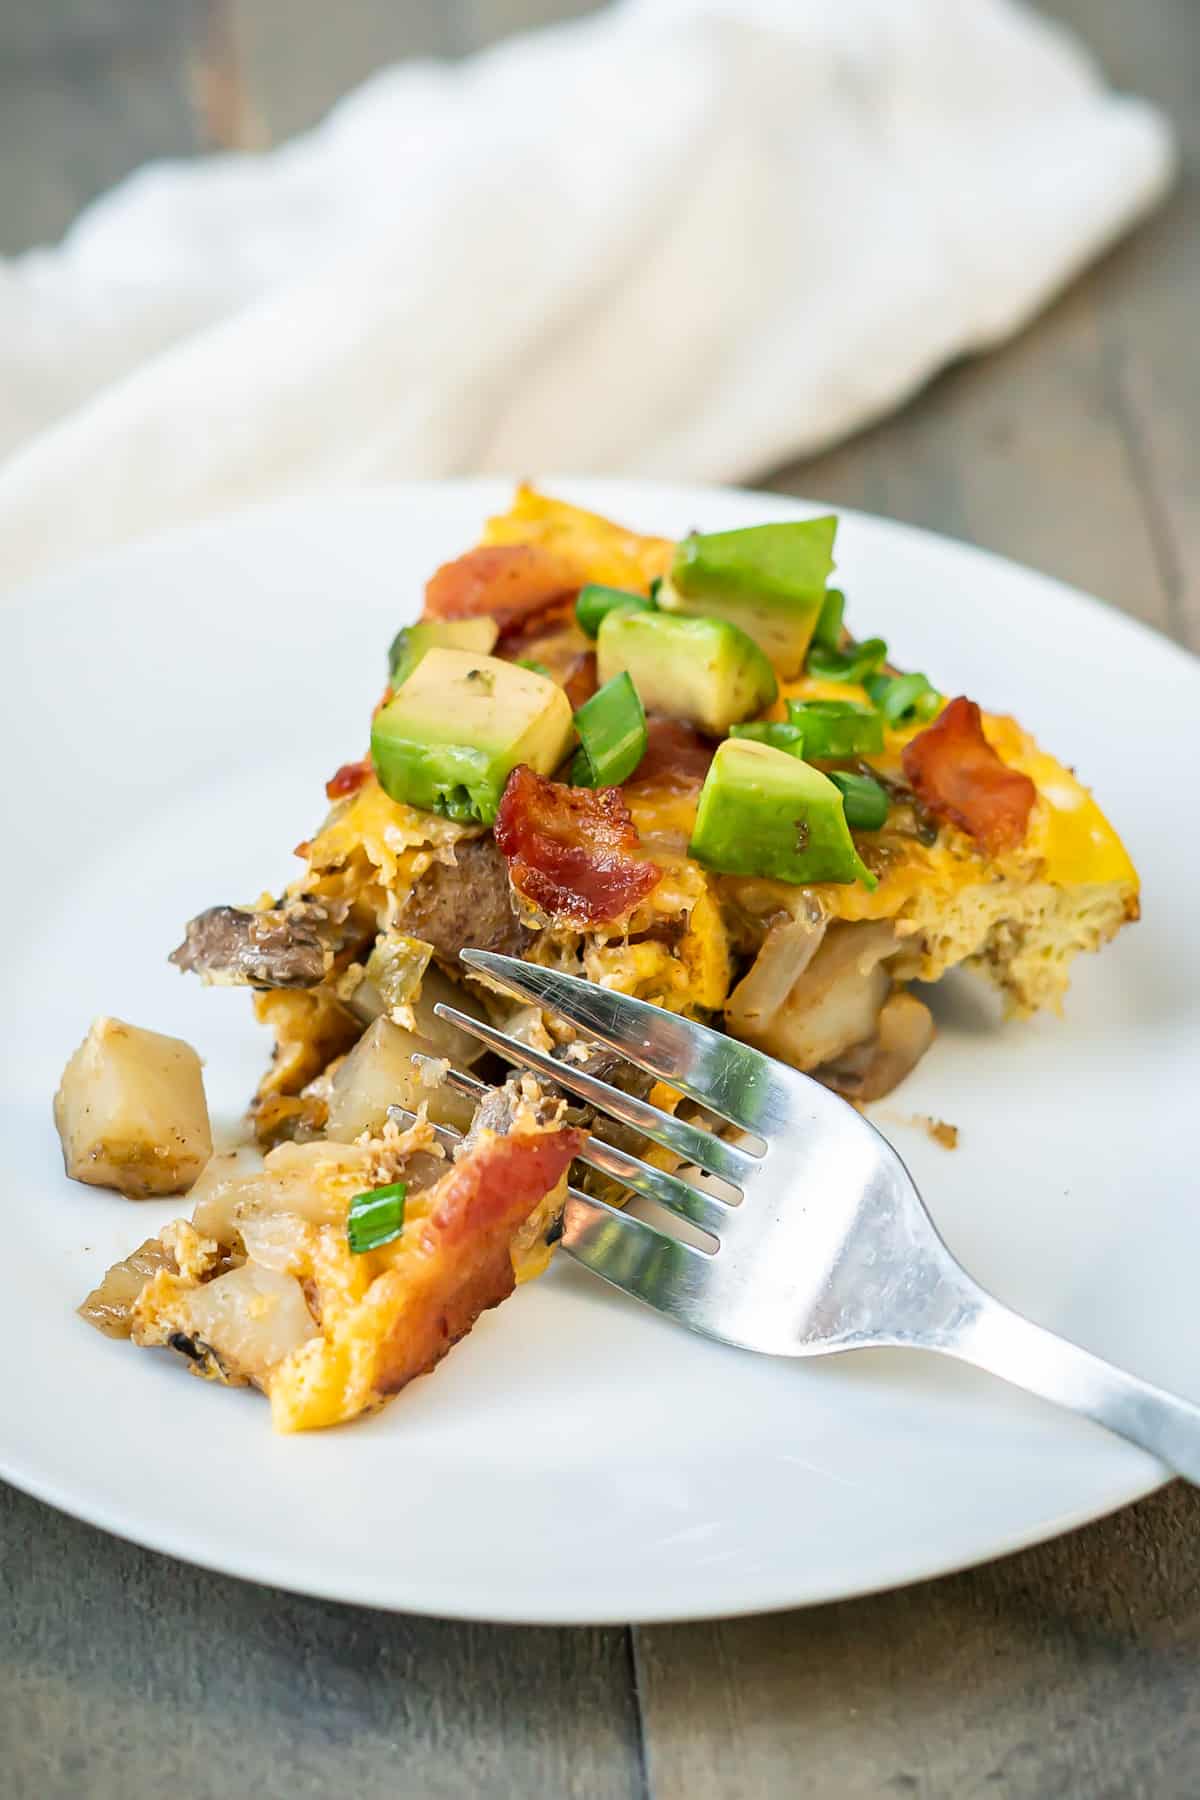 A slice of an egg and potato breakfast skillet to show the vegetable, egg, cheese, and bacon layers.